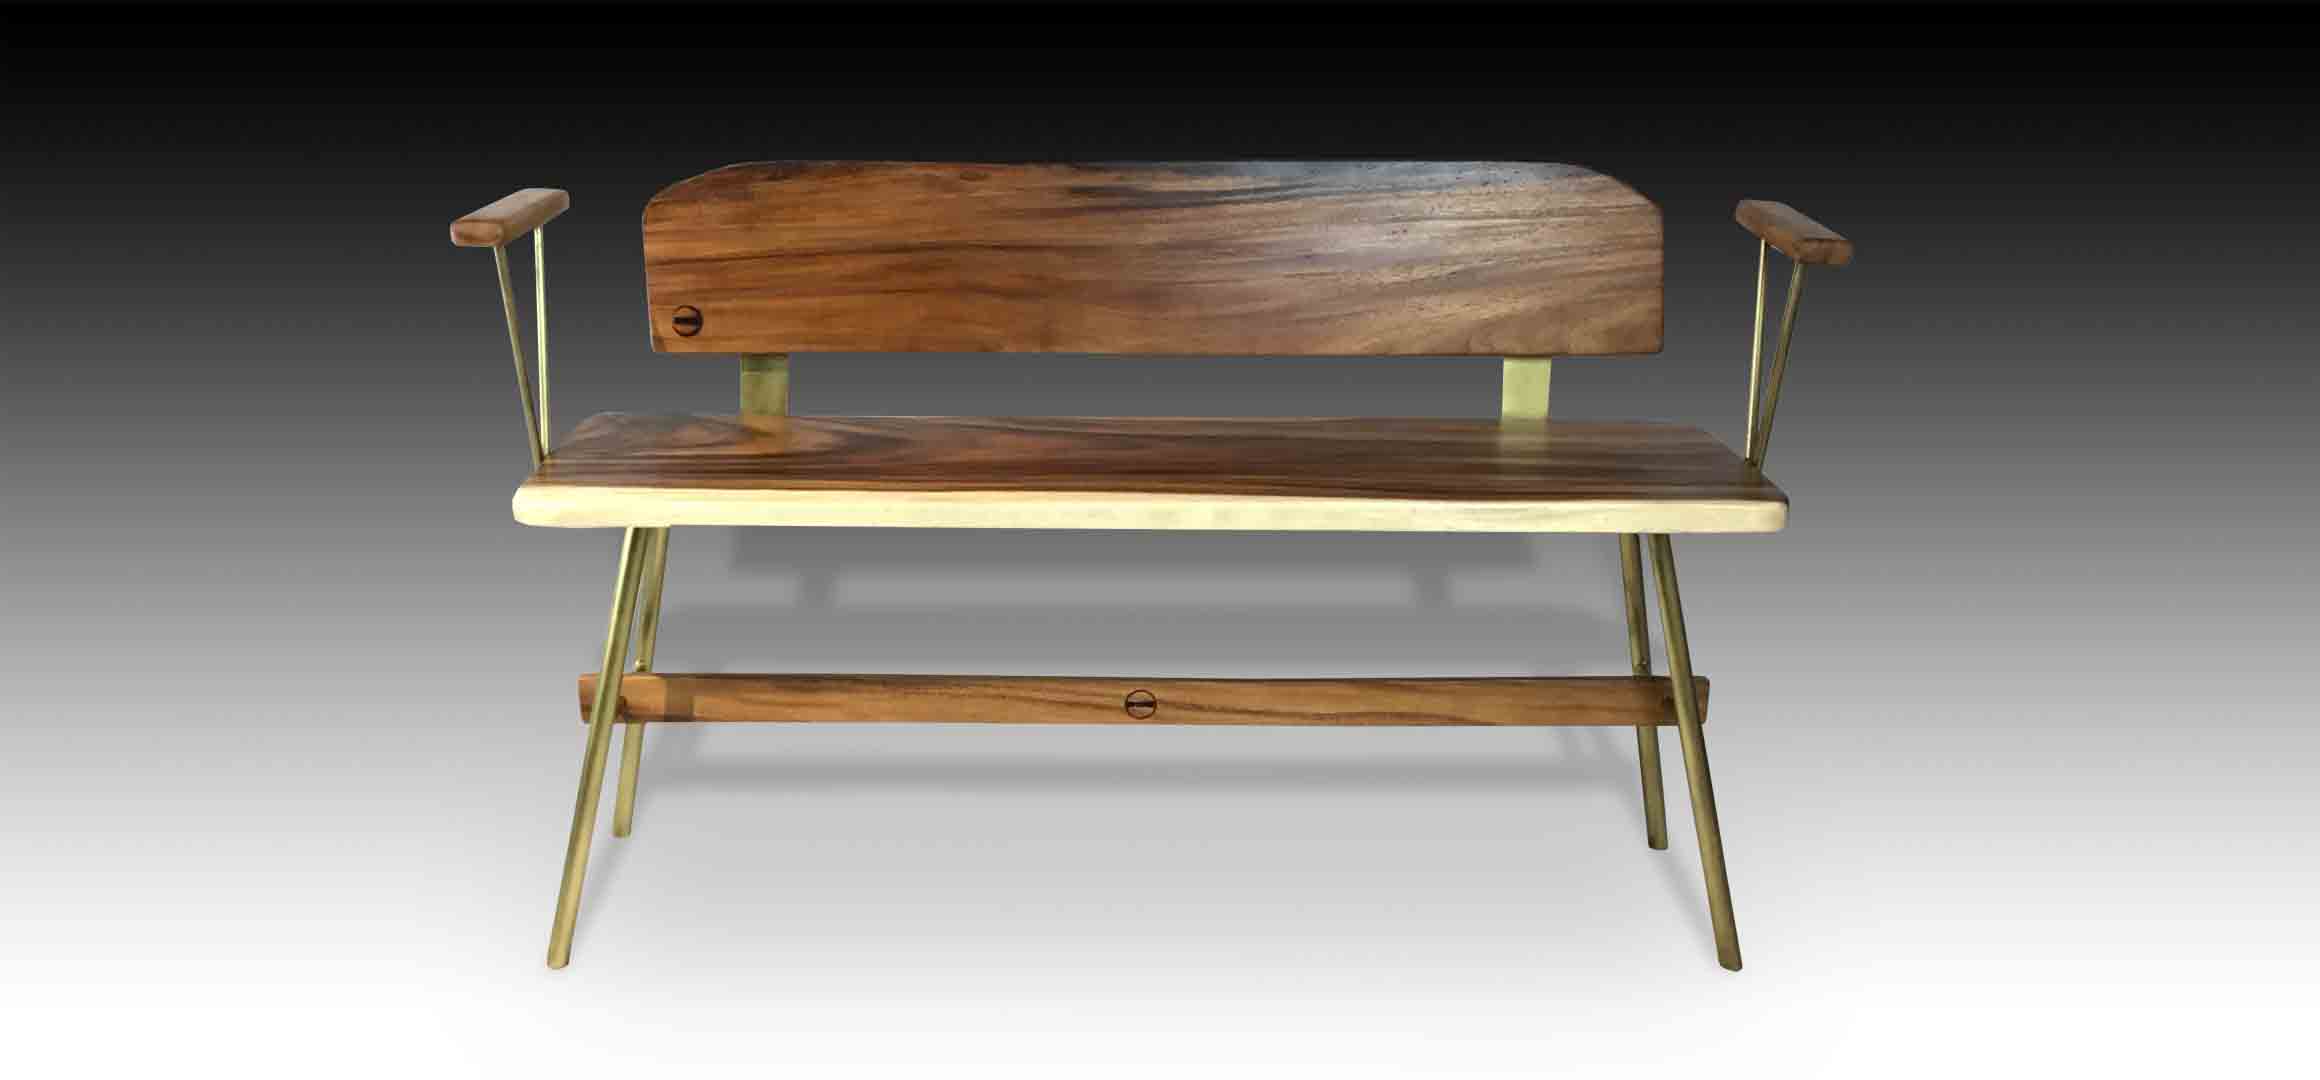 Vernon Gold Suar wood Bench front view